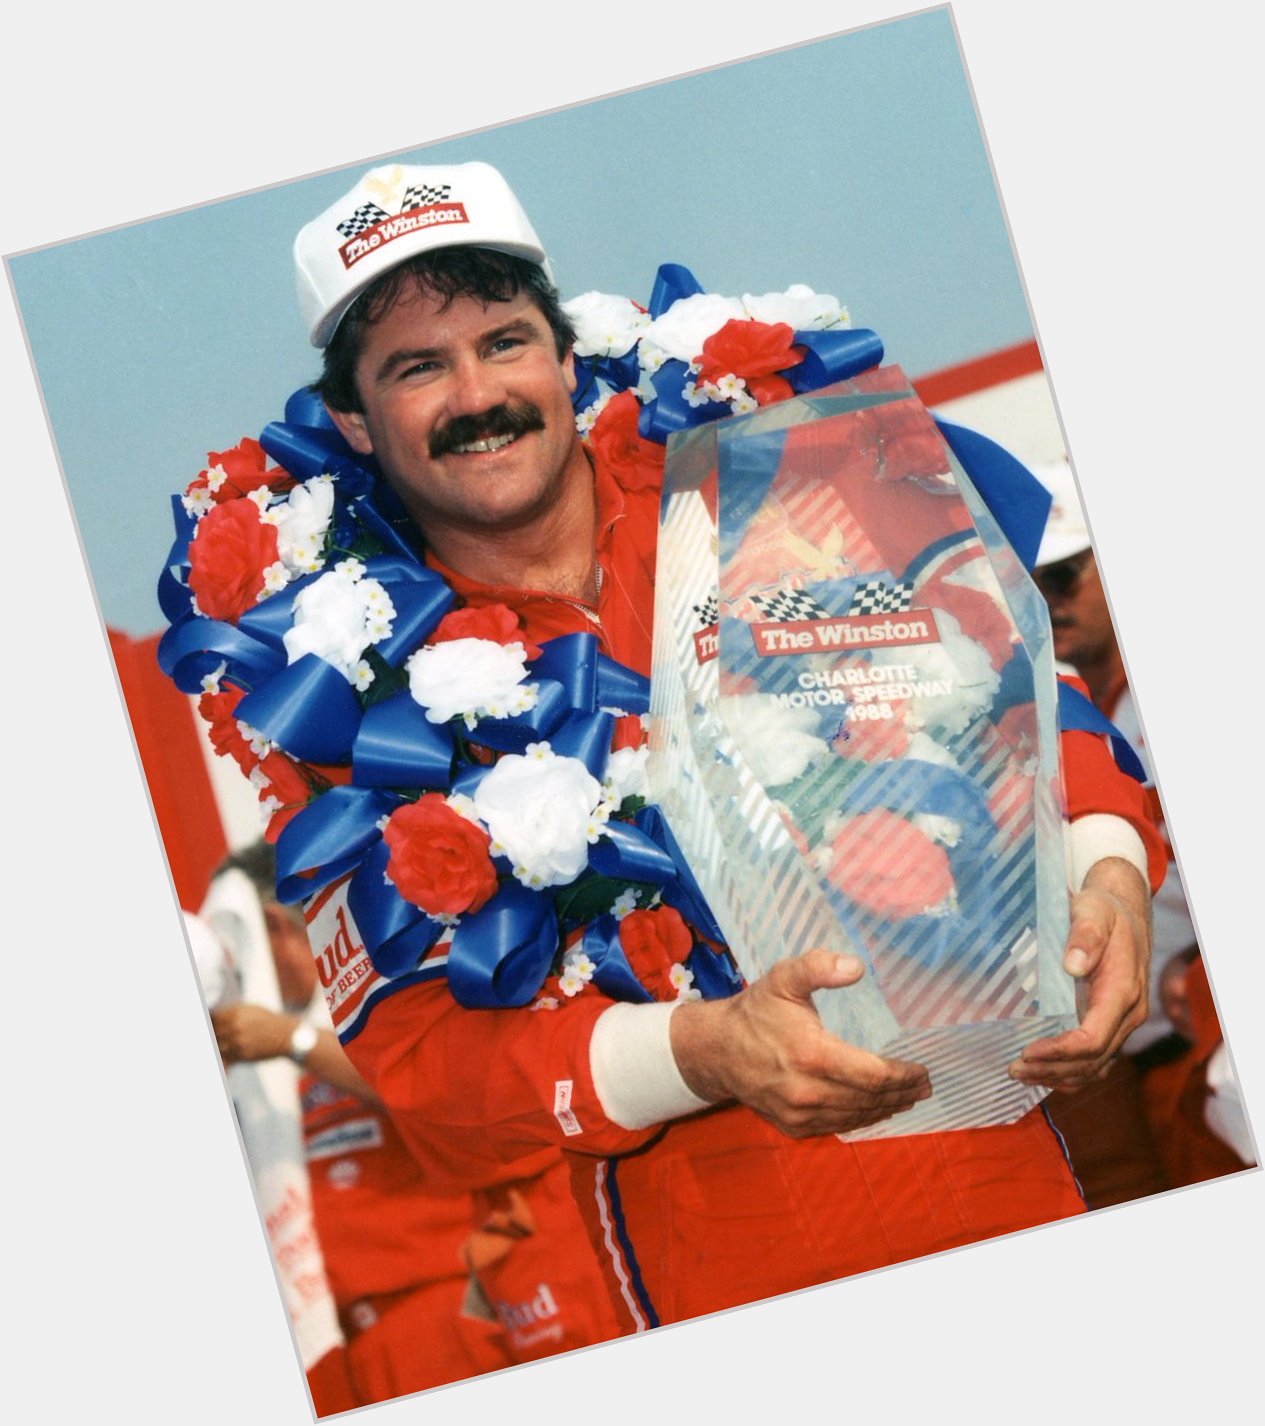 Join us in wishing 2-time champion & Class of 2016 inductee \"Texas Terry\" Labonte a very happy birthday. 